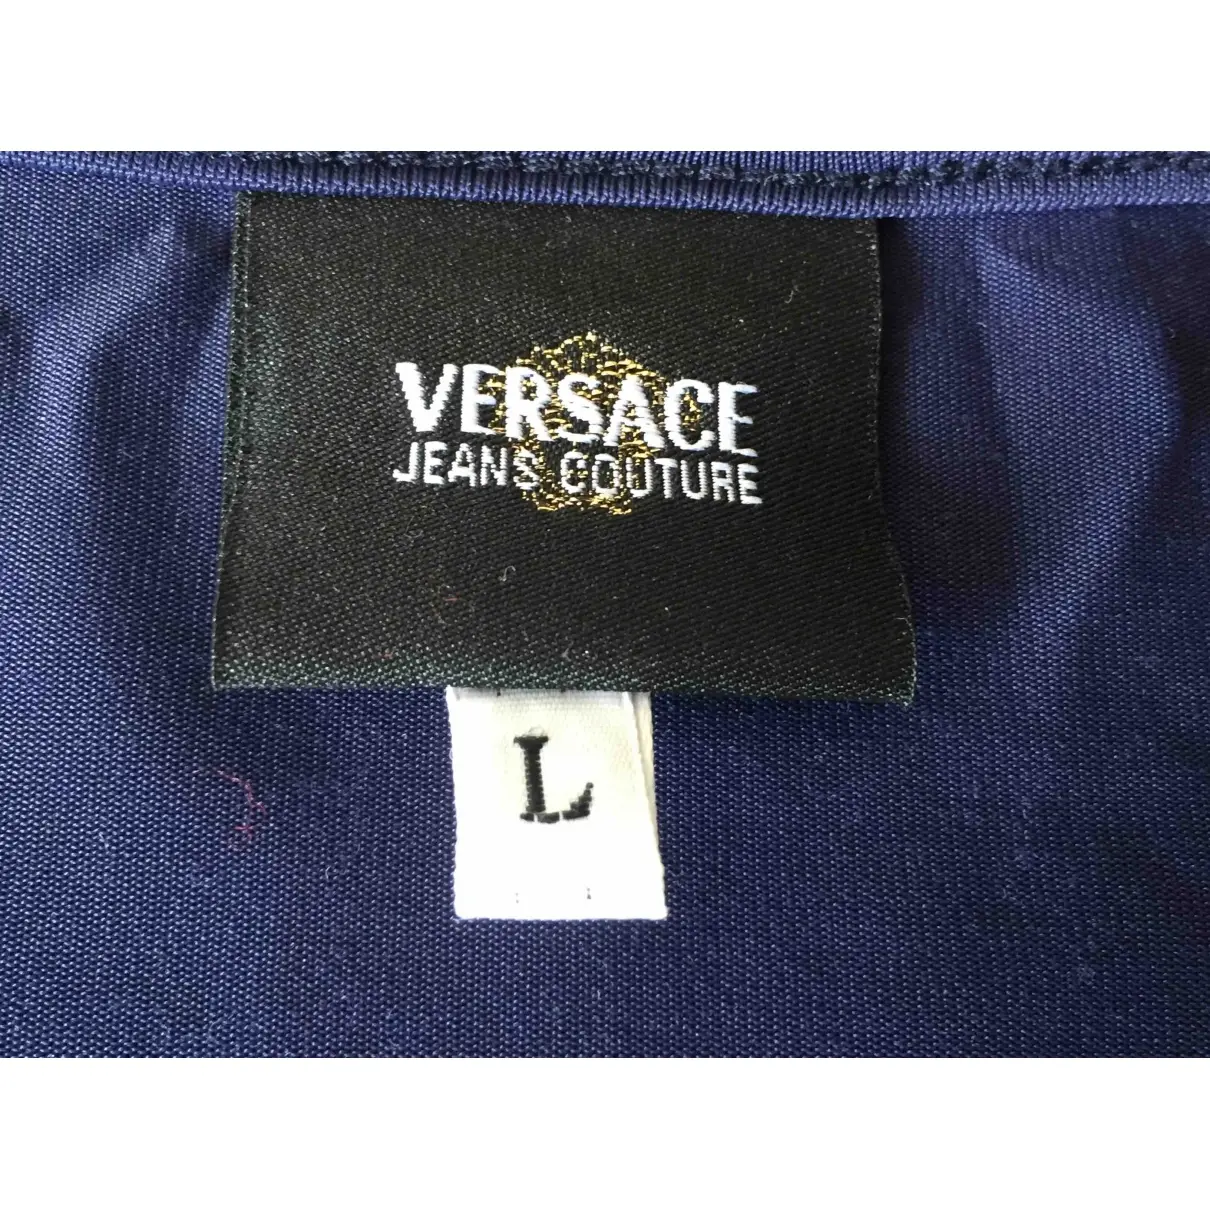 Buy Versace Jeans Couture Blue Synthetic Top online